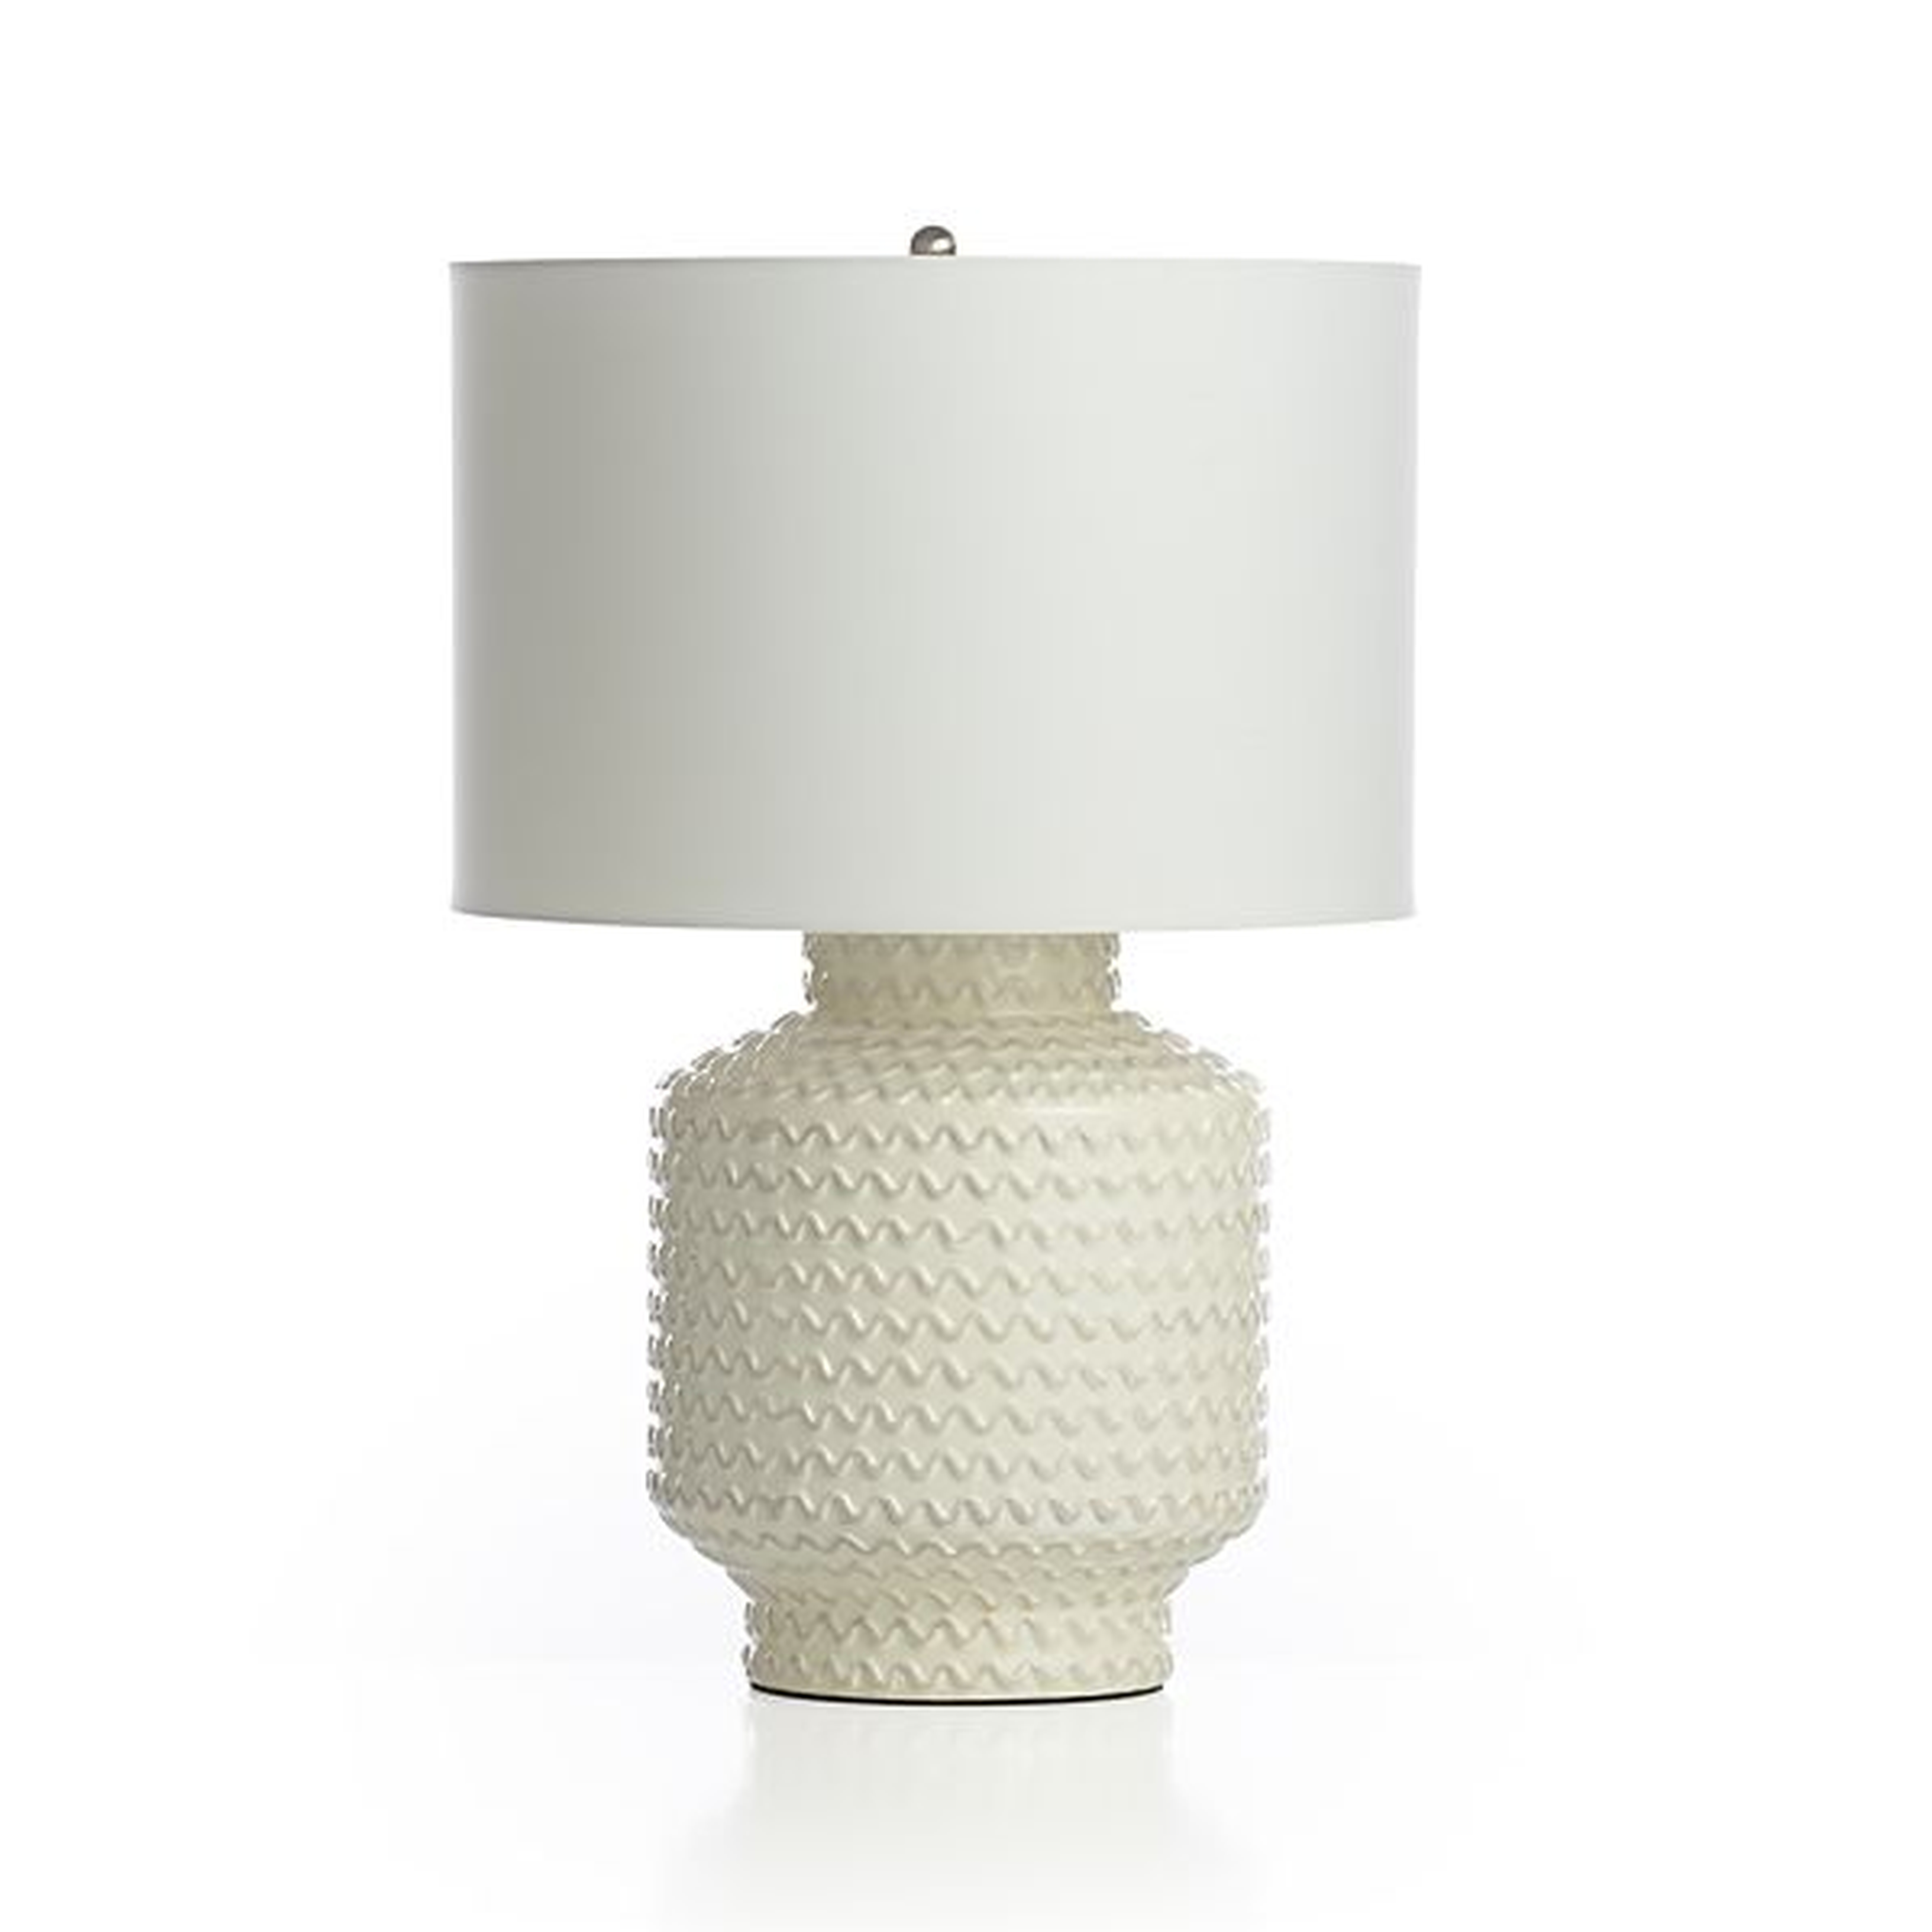 Ziggy Table Lamp - Crate and Barrel